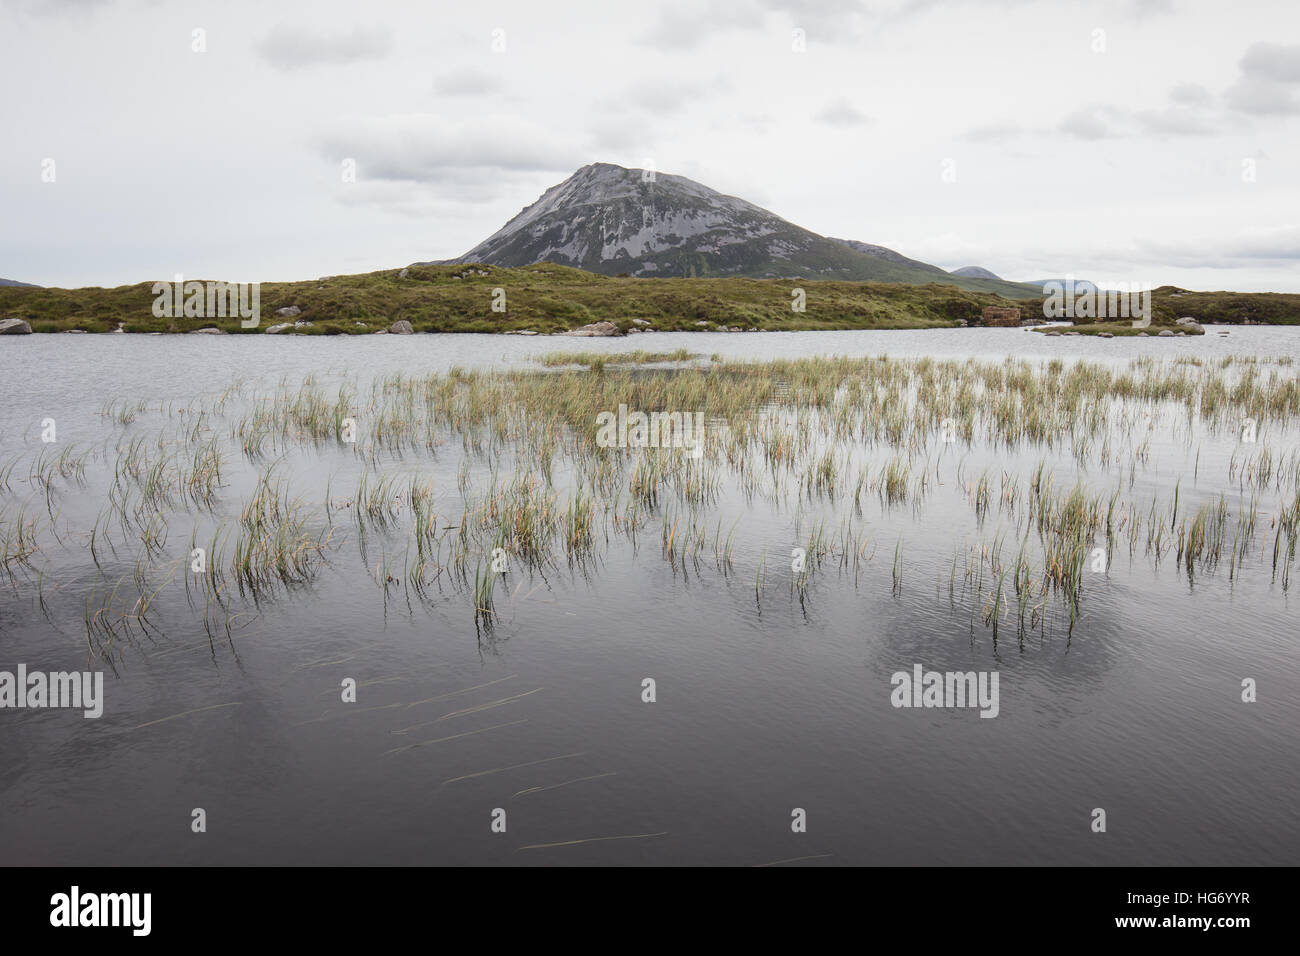 View of Mount Errigal from sleeve snaght loch. Glenveagh national park, County Donegal, Ireland. Stock Photo